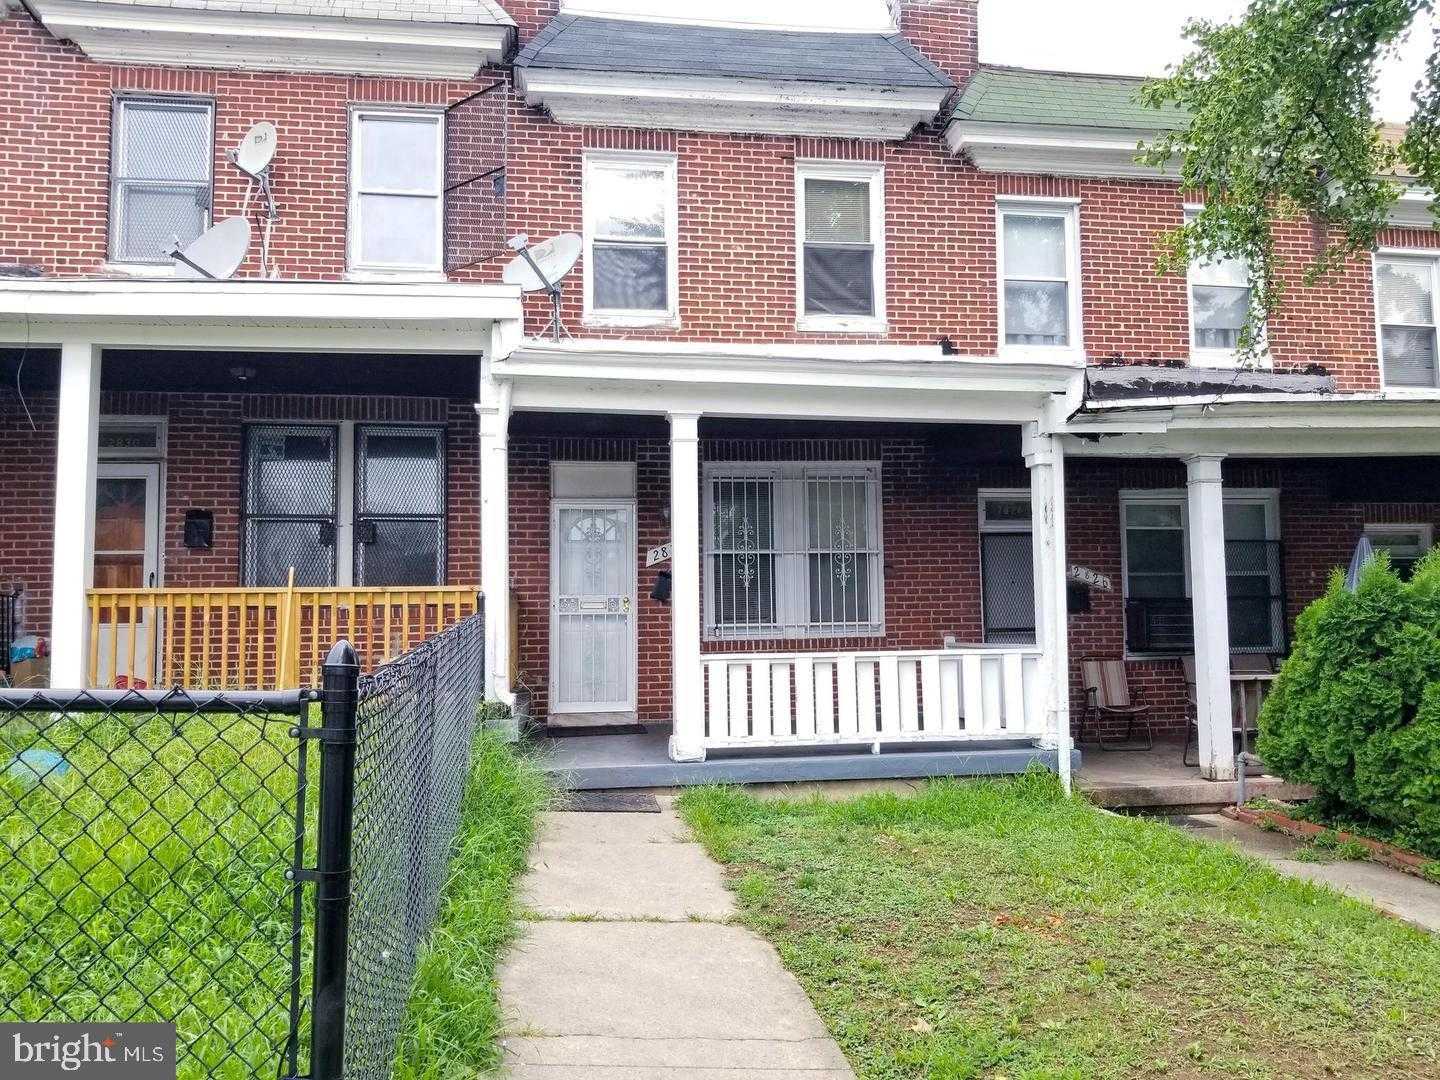 View BALTIMORE, MD 21216 townhome